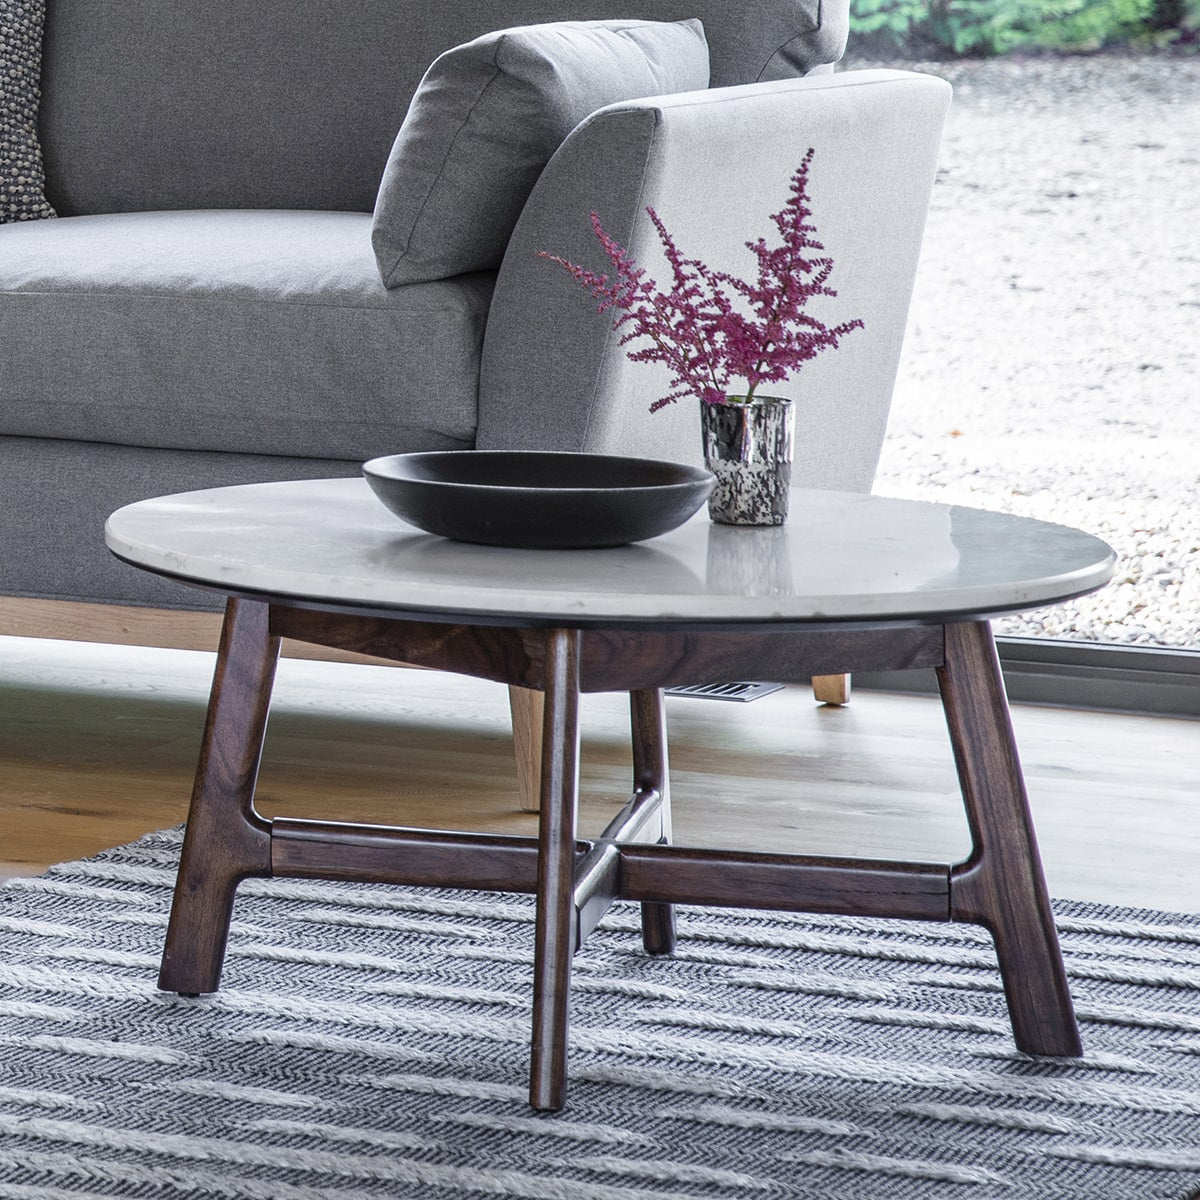 Closer look at marble top surface and wooden leg structure of round coffee table in scandinavian minimalist style